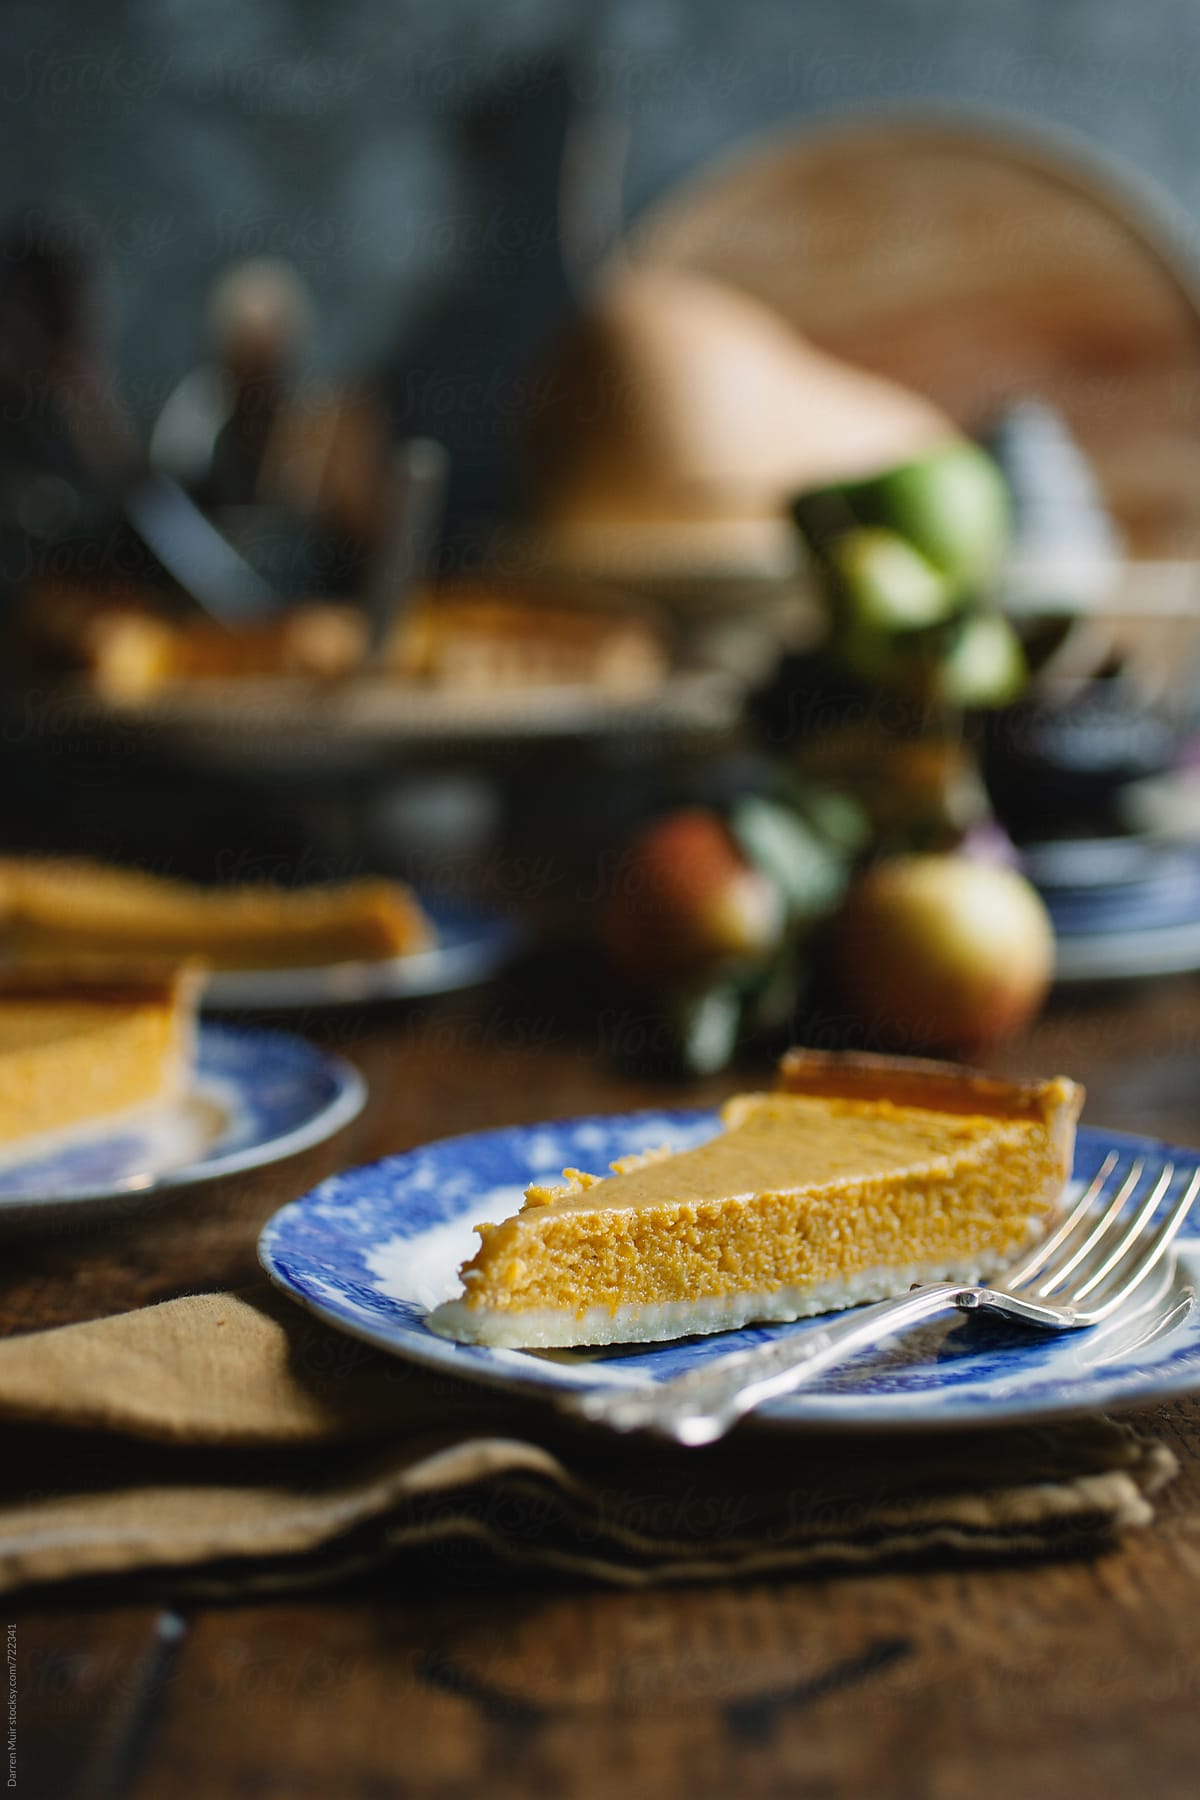 Slice of pumpkin pie on a blue plate on wooden table, selective focus.